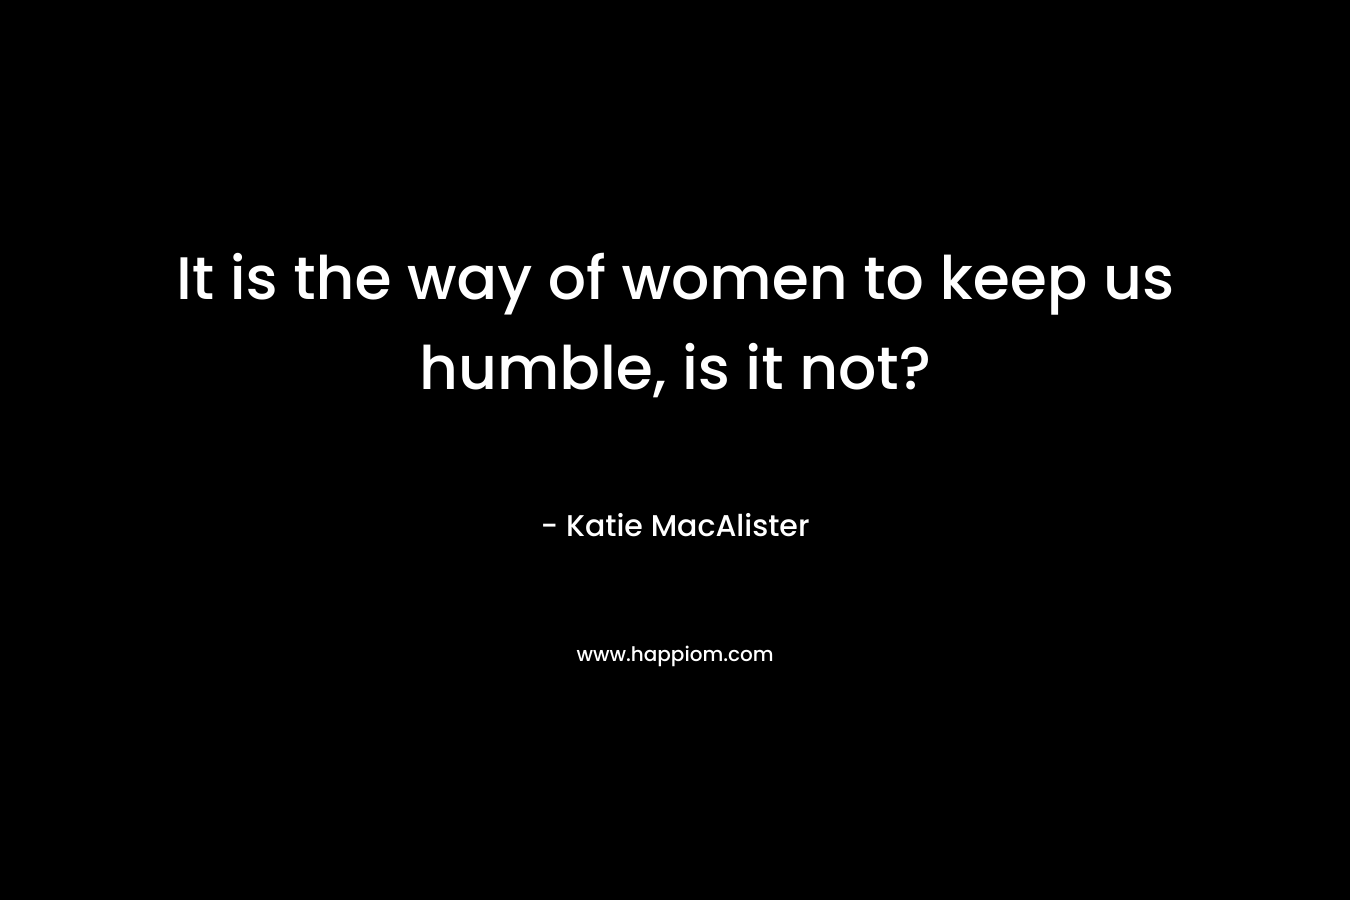 It is the way of women to keep us humble, is it not? – Katie MacAlister